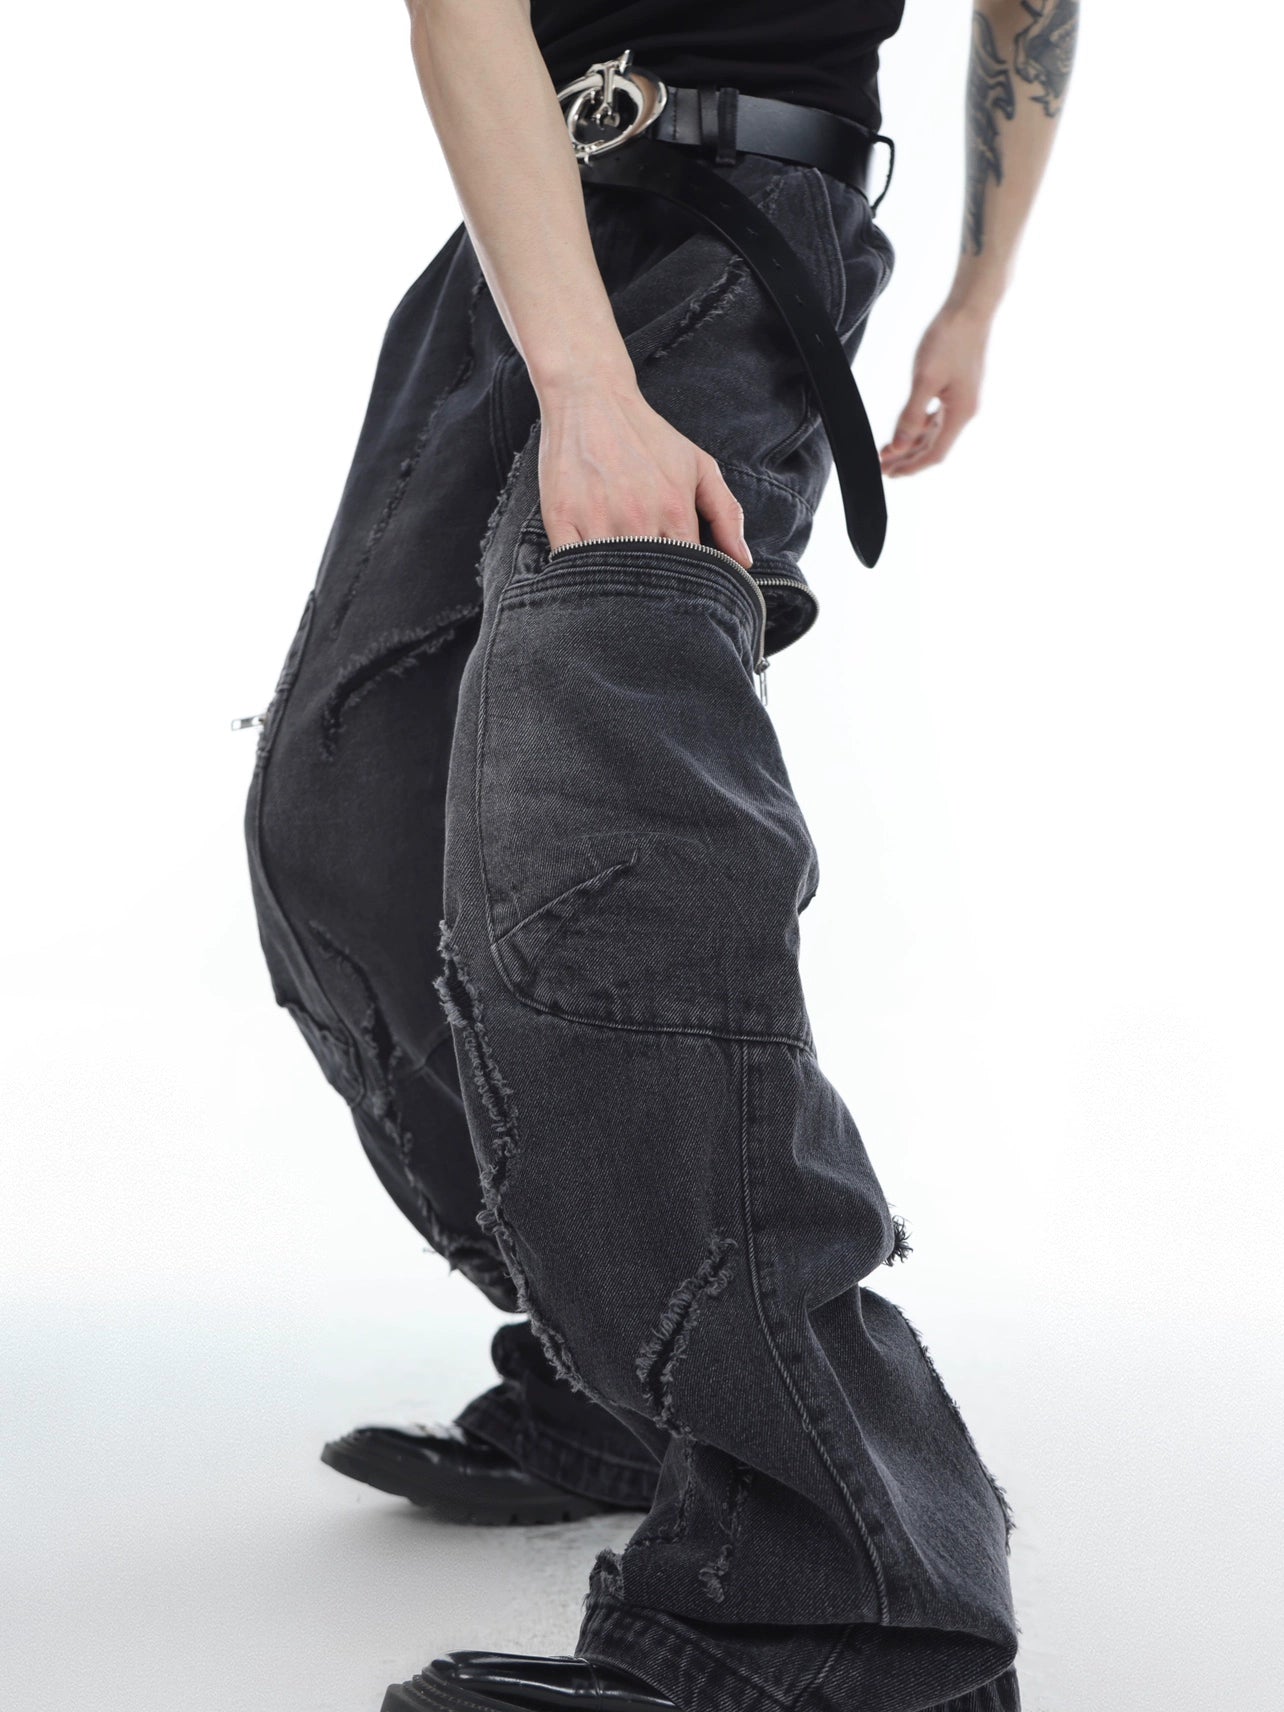 CulturE Niche Heavy Wash Vintage Jeans Deconstructed Pocket Design Slim Fit Micro Flared Pants Distressed Long Pants